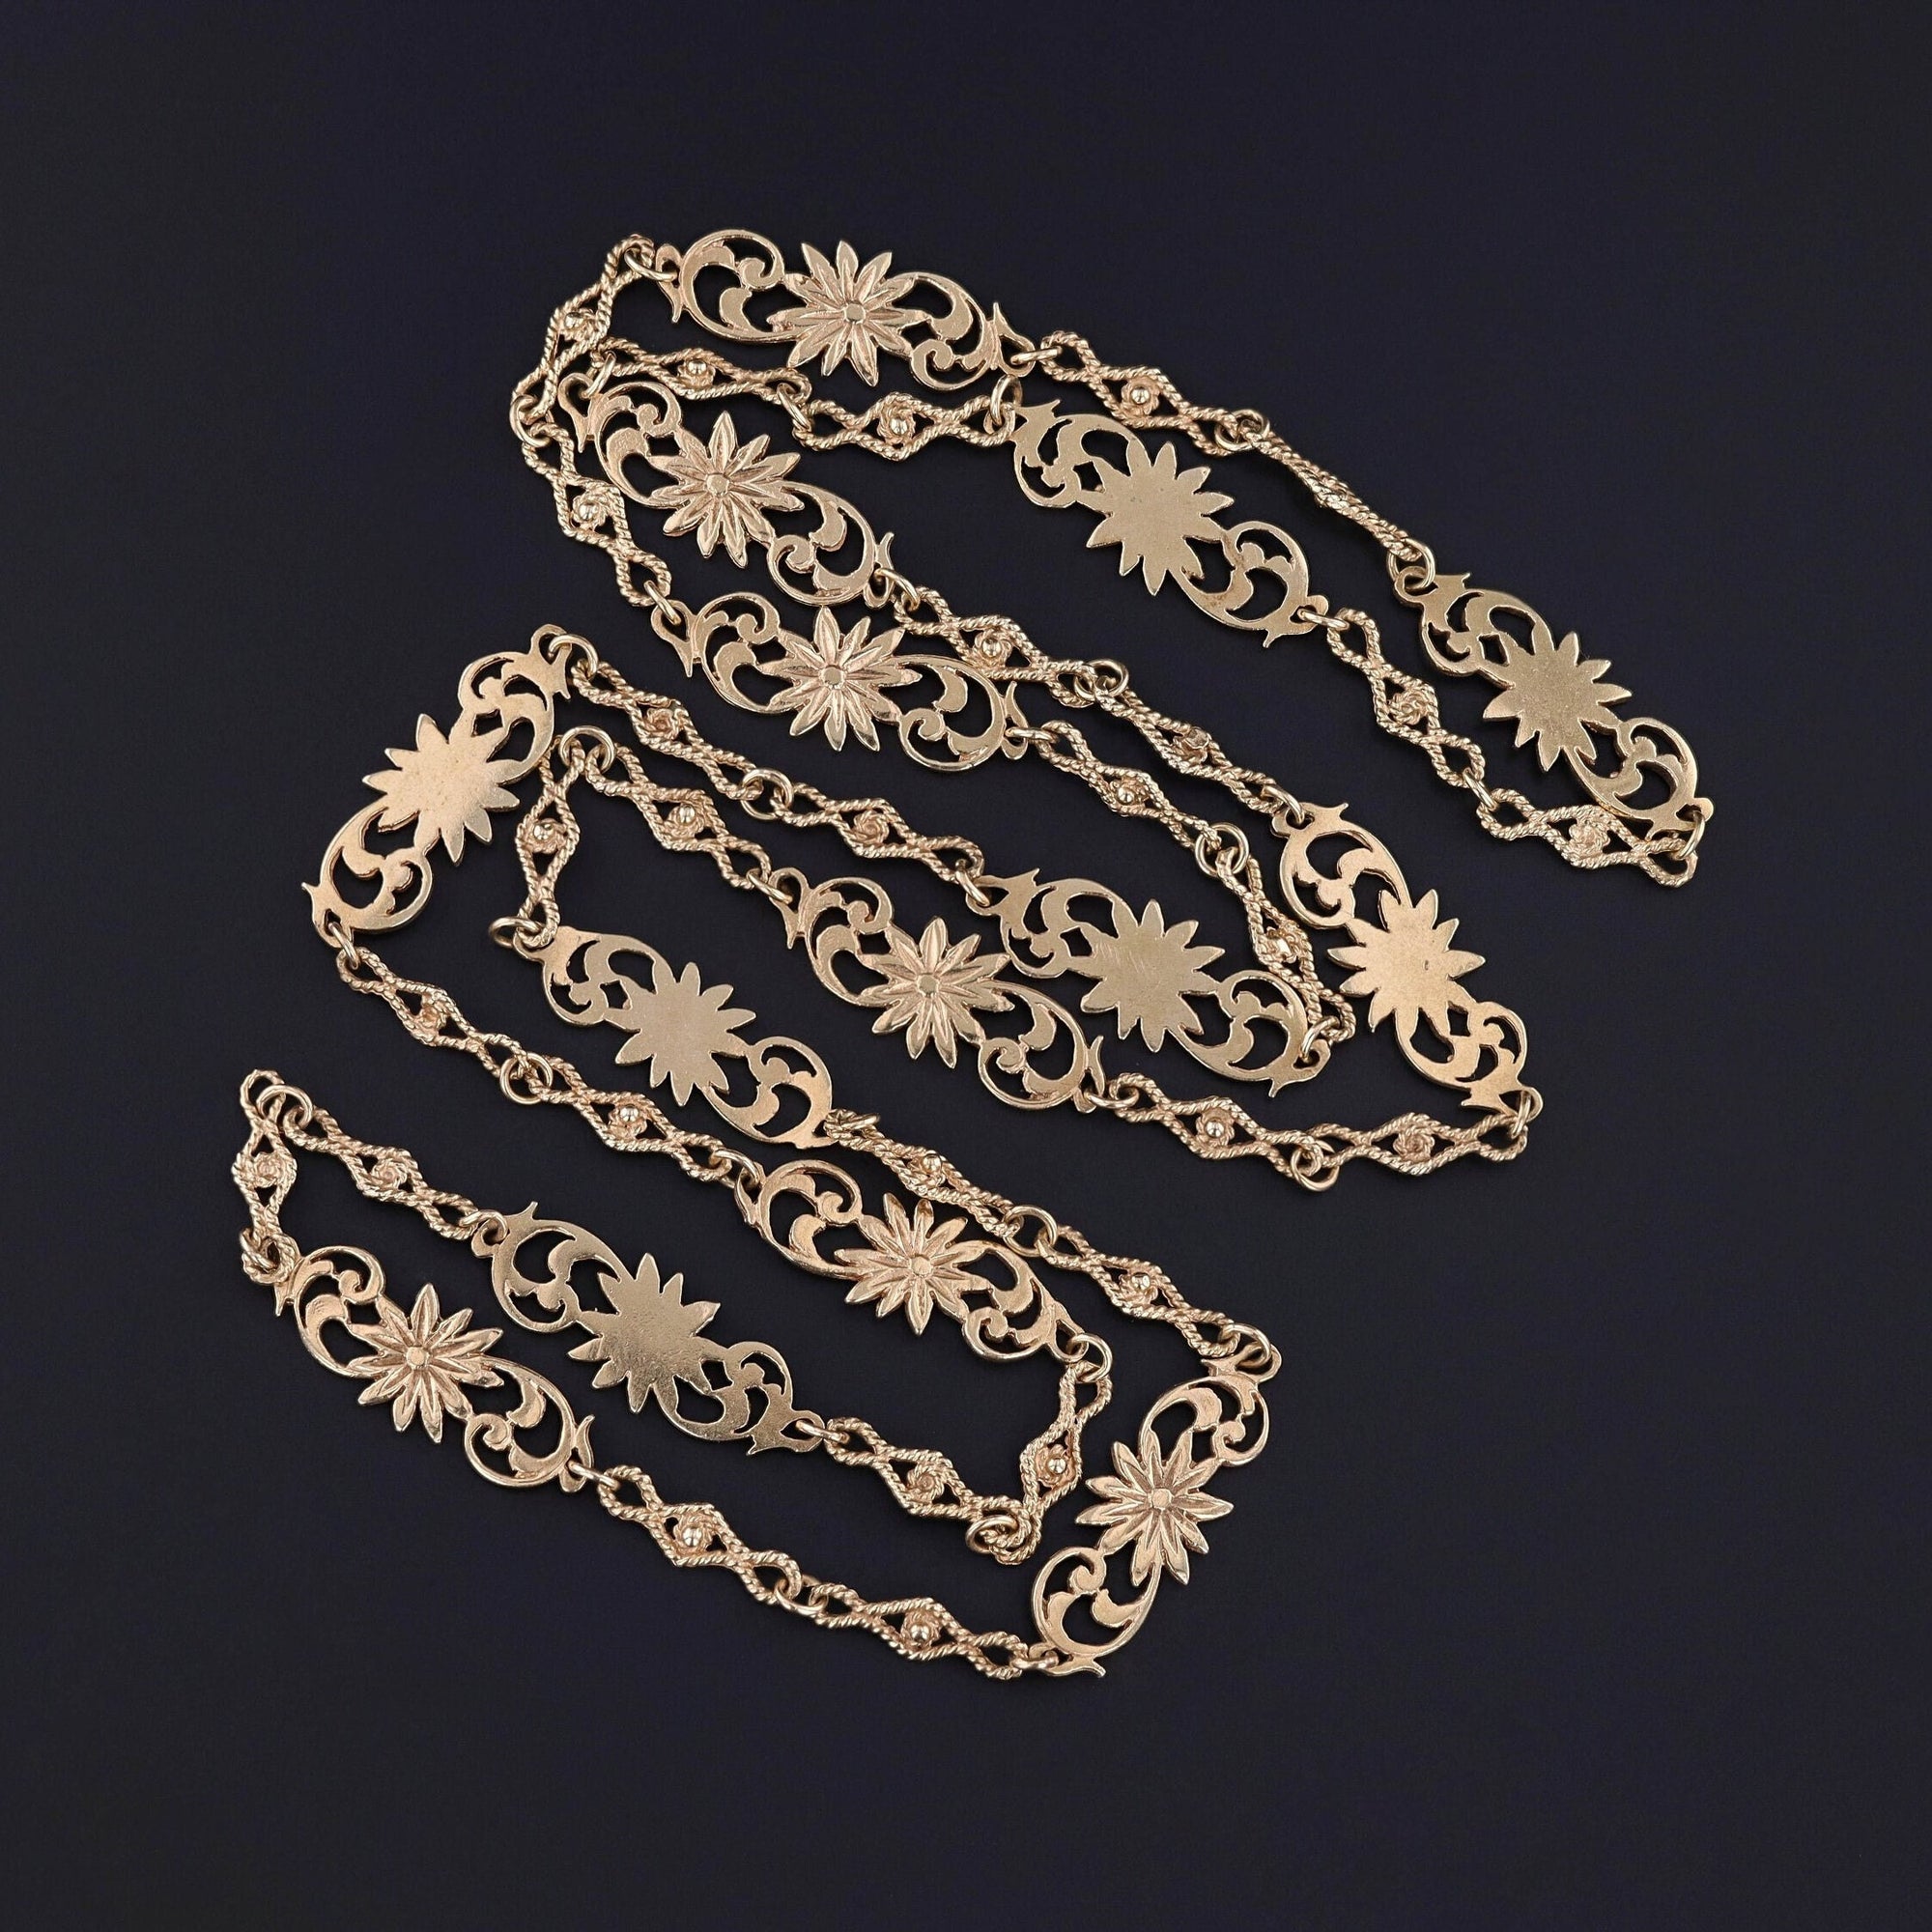 A Victorian era 14k gold floral link chain. The chain is in great condition and measures 29 inches.